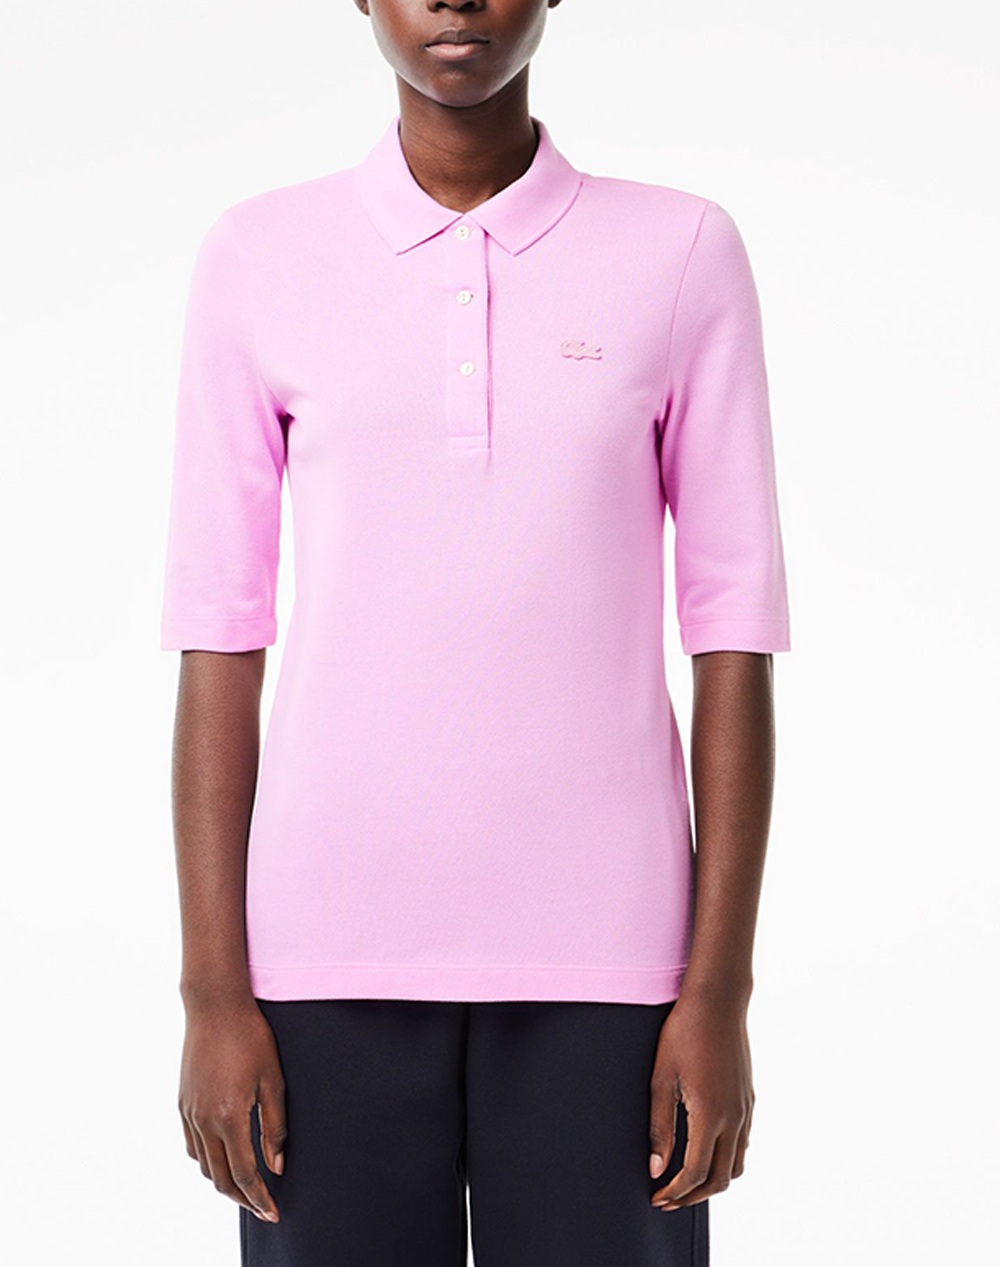 LACOSTE ΜΠΛΟΥΖΑ ΚΜ SHORT SLEEVED RIBBED COLLAR SHIRT 3PF0503-IXV Pink 3810ALACO3410041_XR28107